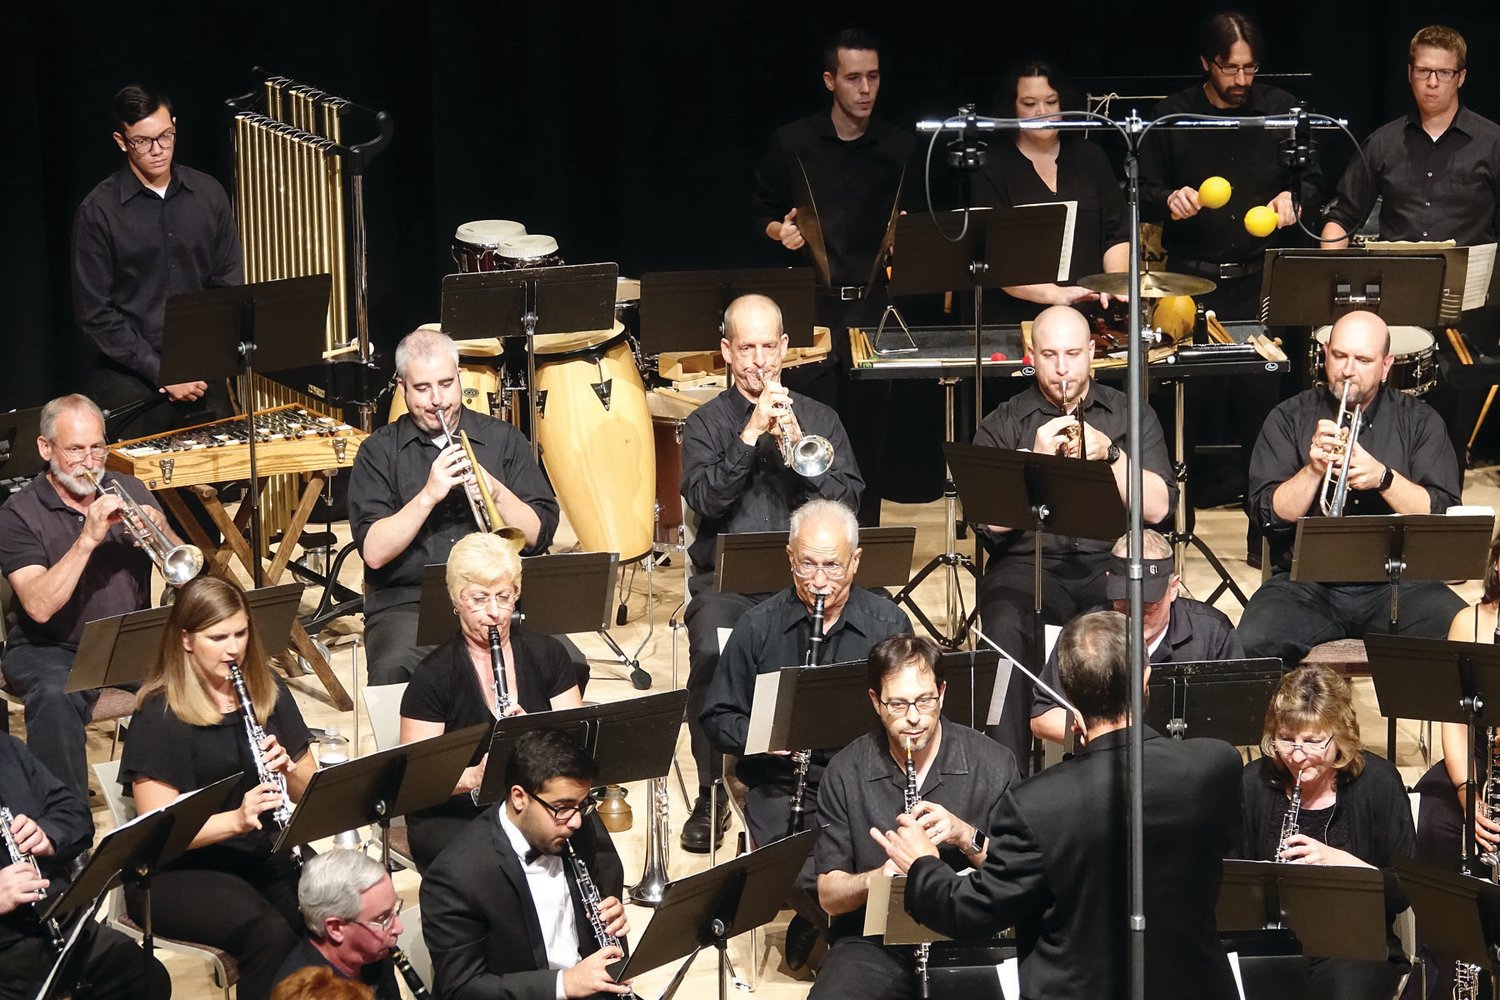 Doylestown Symphonic Winds performs at 7:30 p.m. Friday, July 30, in the Delaware Valley University Life Sciences Building theater in Doylestown.